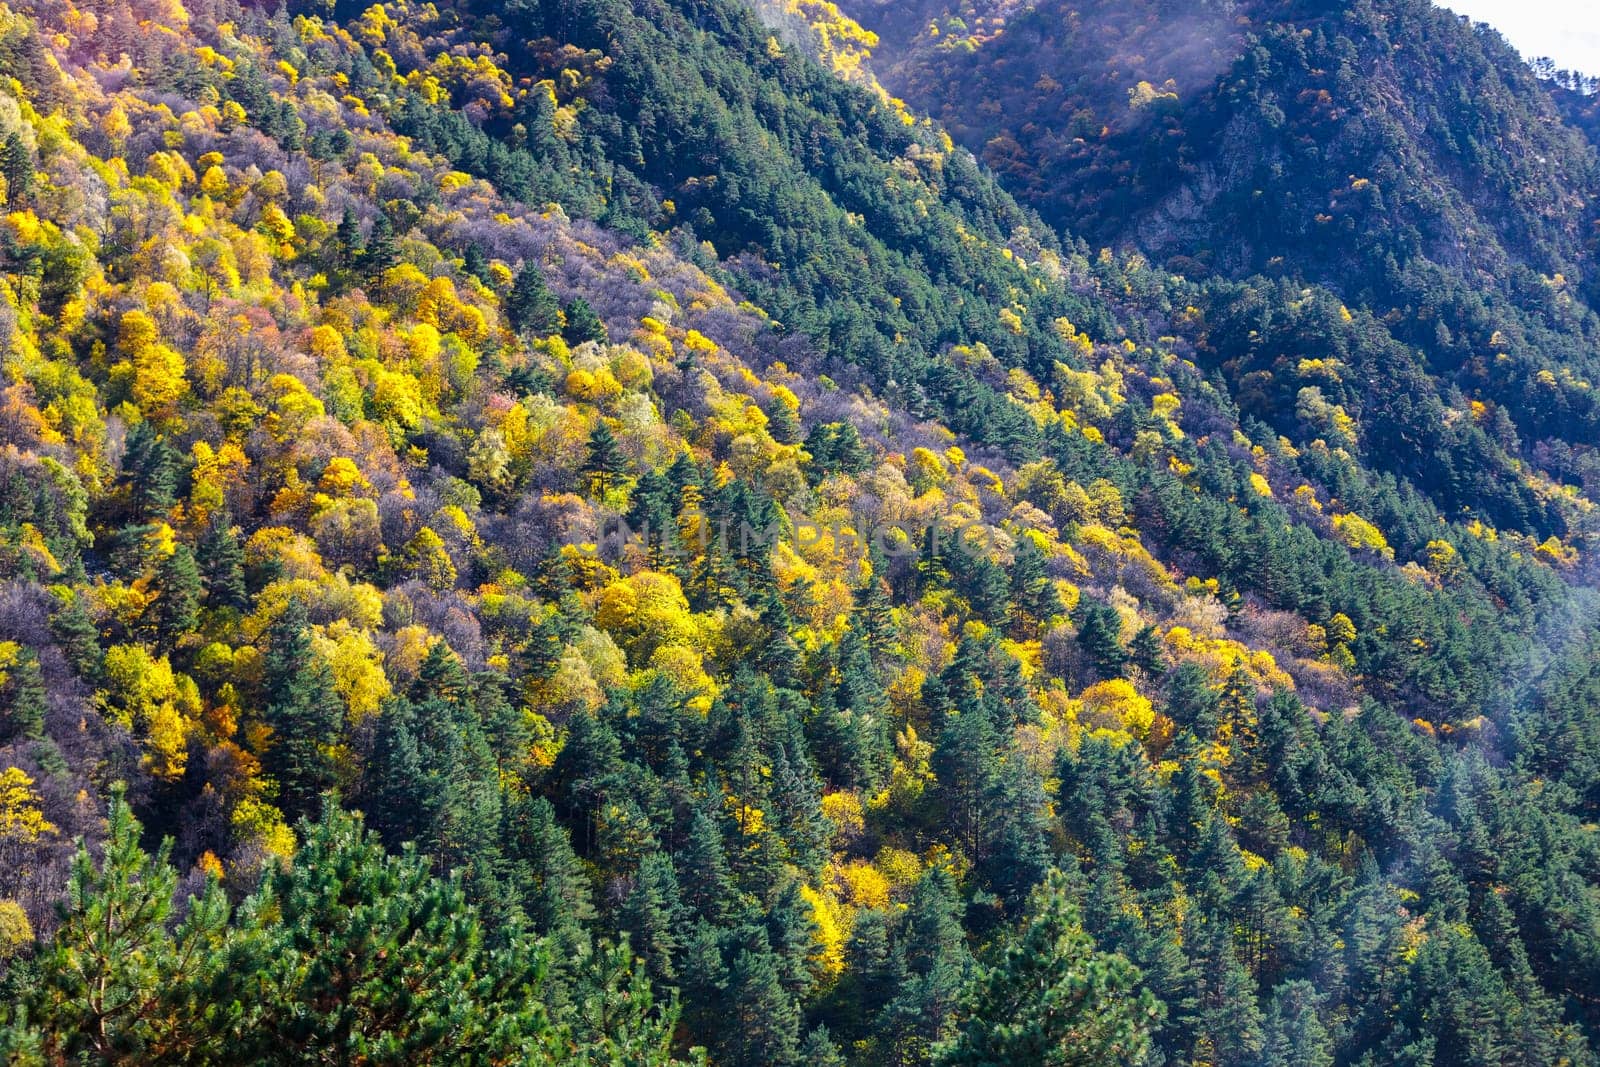 Picturesque autumn trees in the mountains create an amazing and vibrant landscape by Yurich32